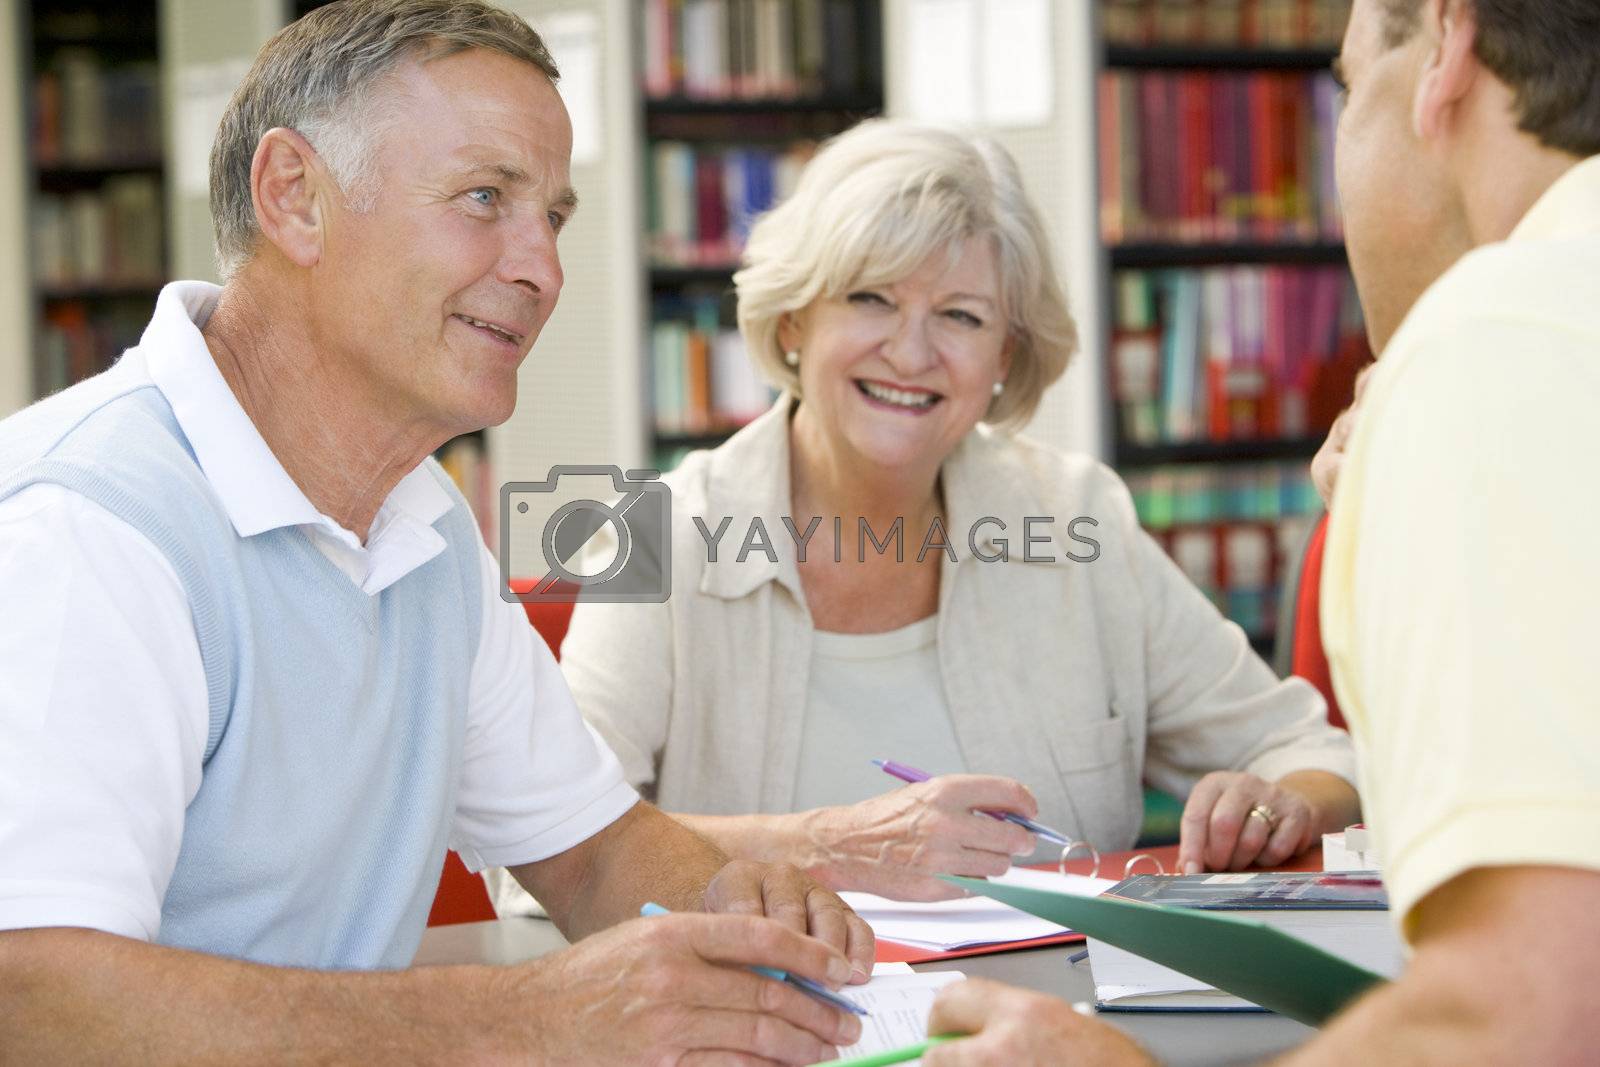 Royalty free image of Three people in library writing in notebooks (selective focus) by MonkeyBusiness